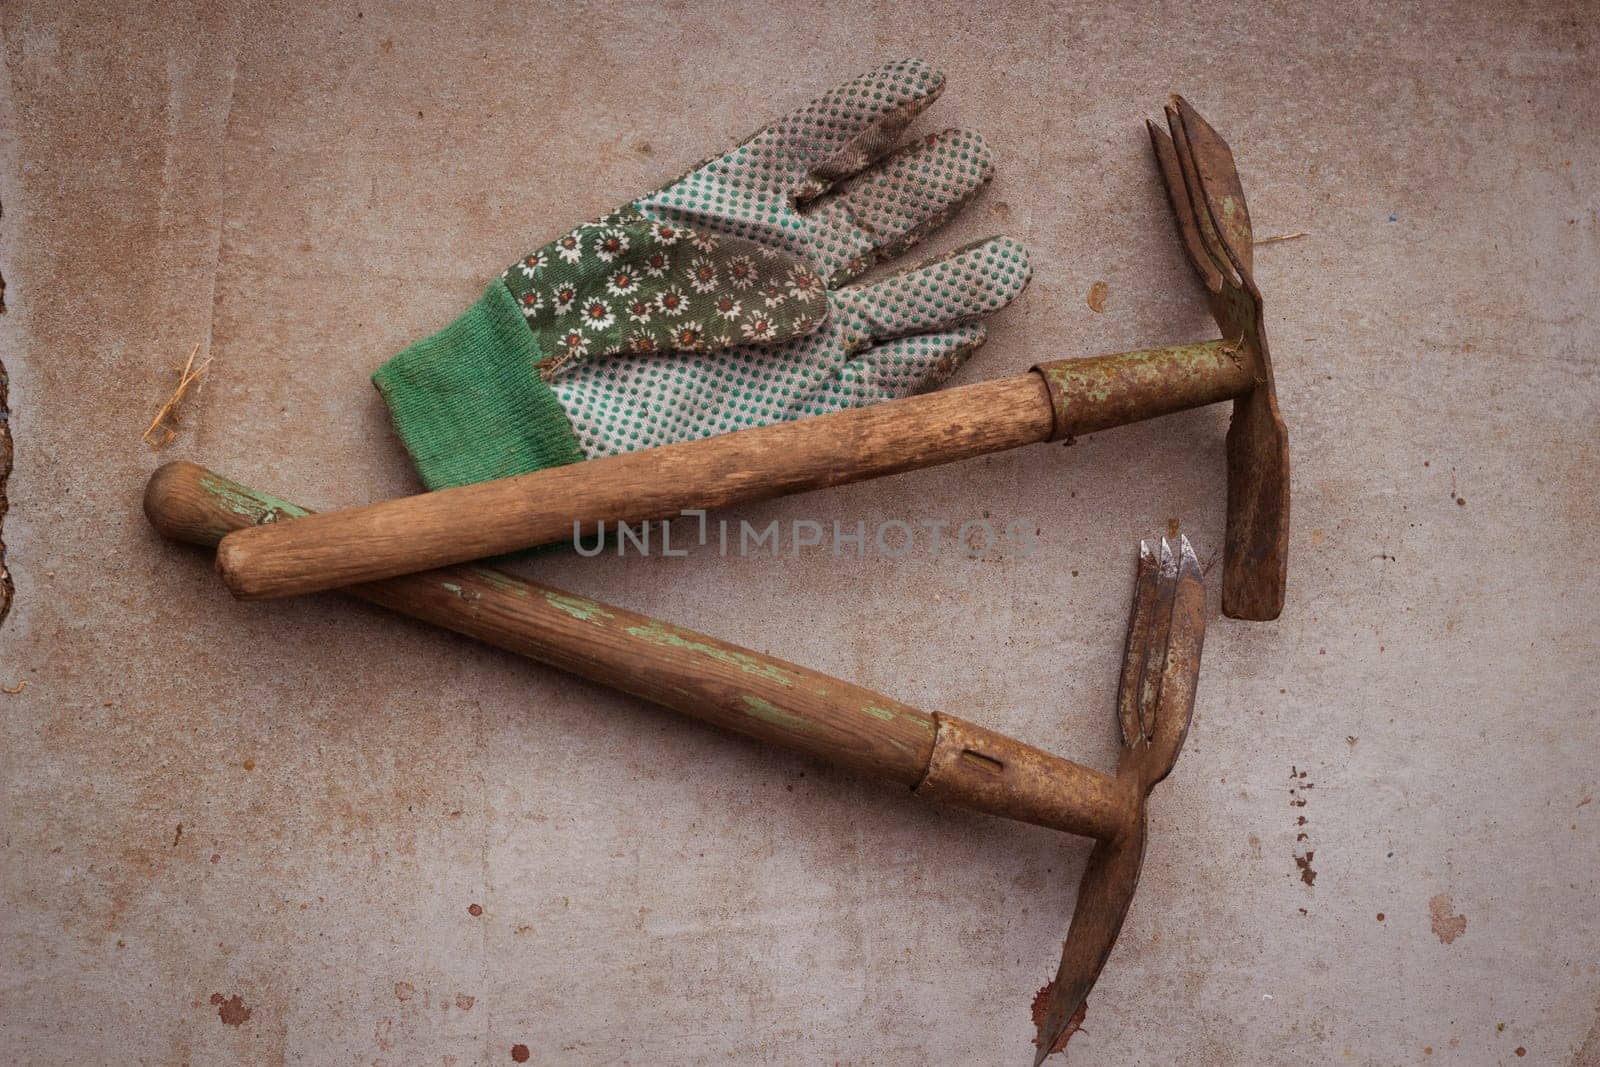 Tools for farming hoe chopper and mittens. On by electrovenik